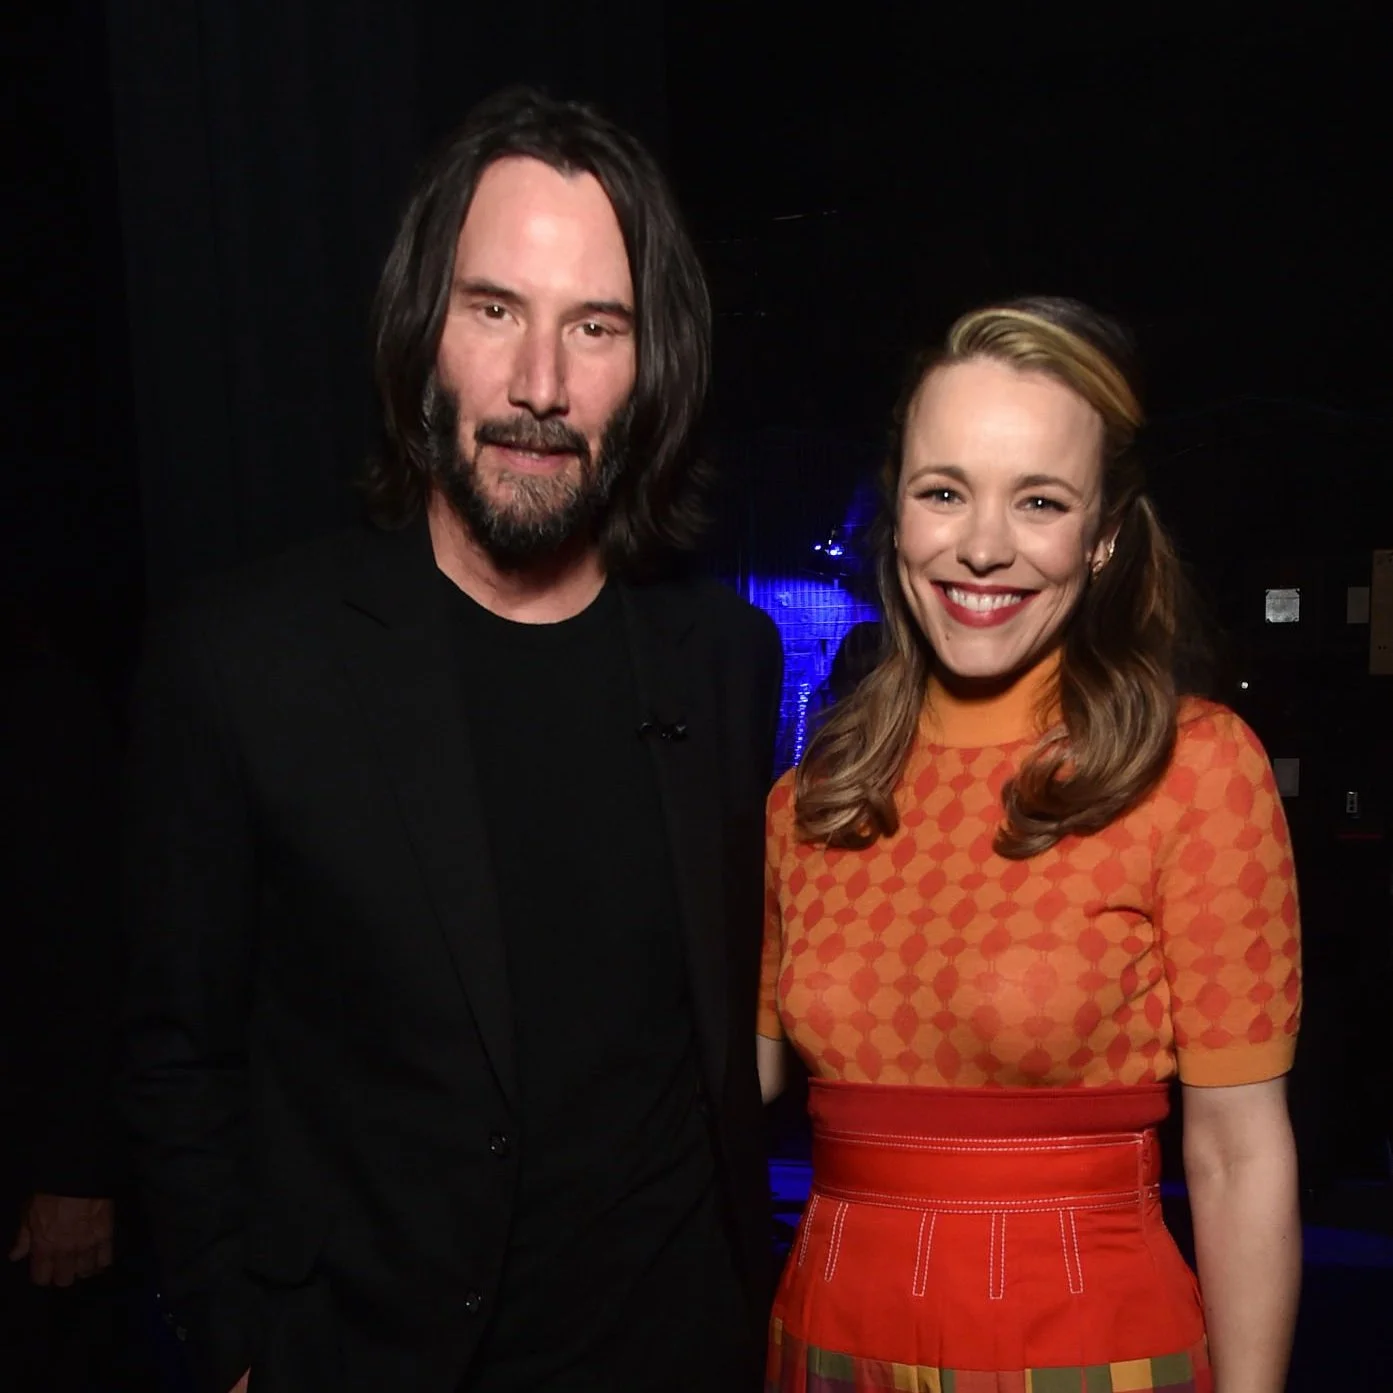 Keanu Reeves and Rachel McAdams pose for a photo at CinemaCon